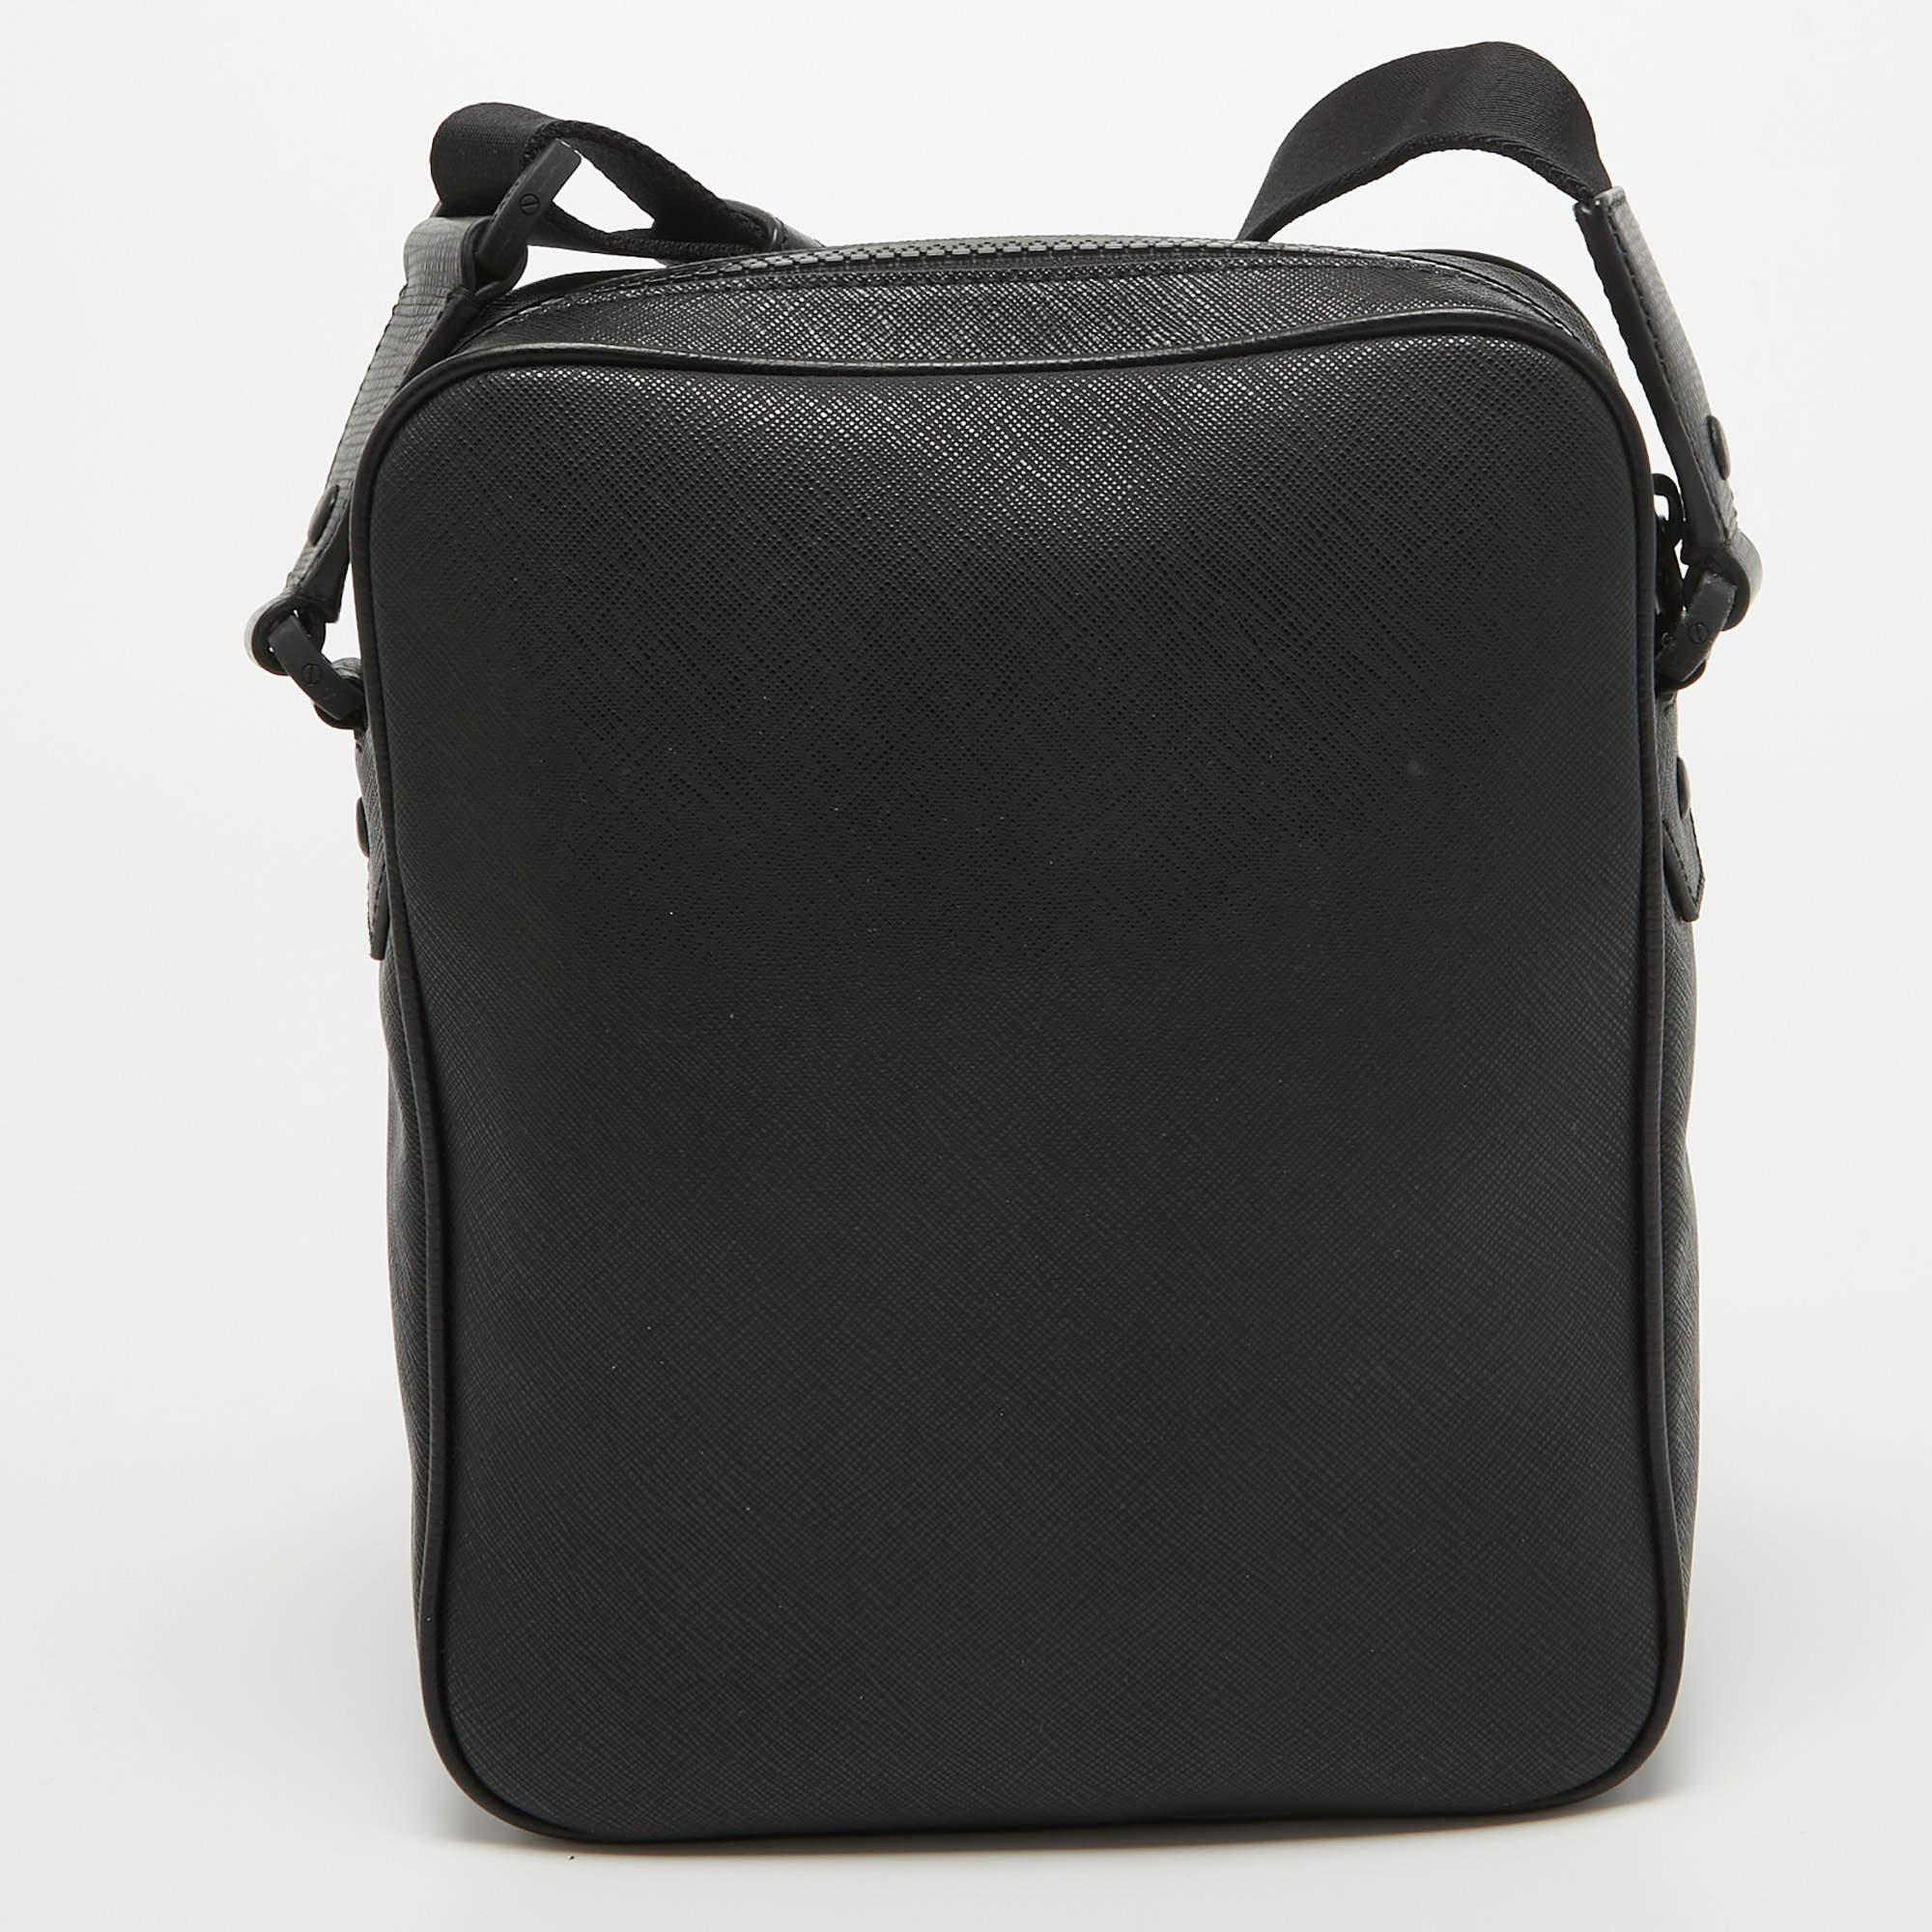 Known for its exclusive craftsmanship, this Bally bag will live up to your expectations. Made from leather in a black shade, the creation comes with a front pocket for easy organization. The messenger bag is completed with an adjustable